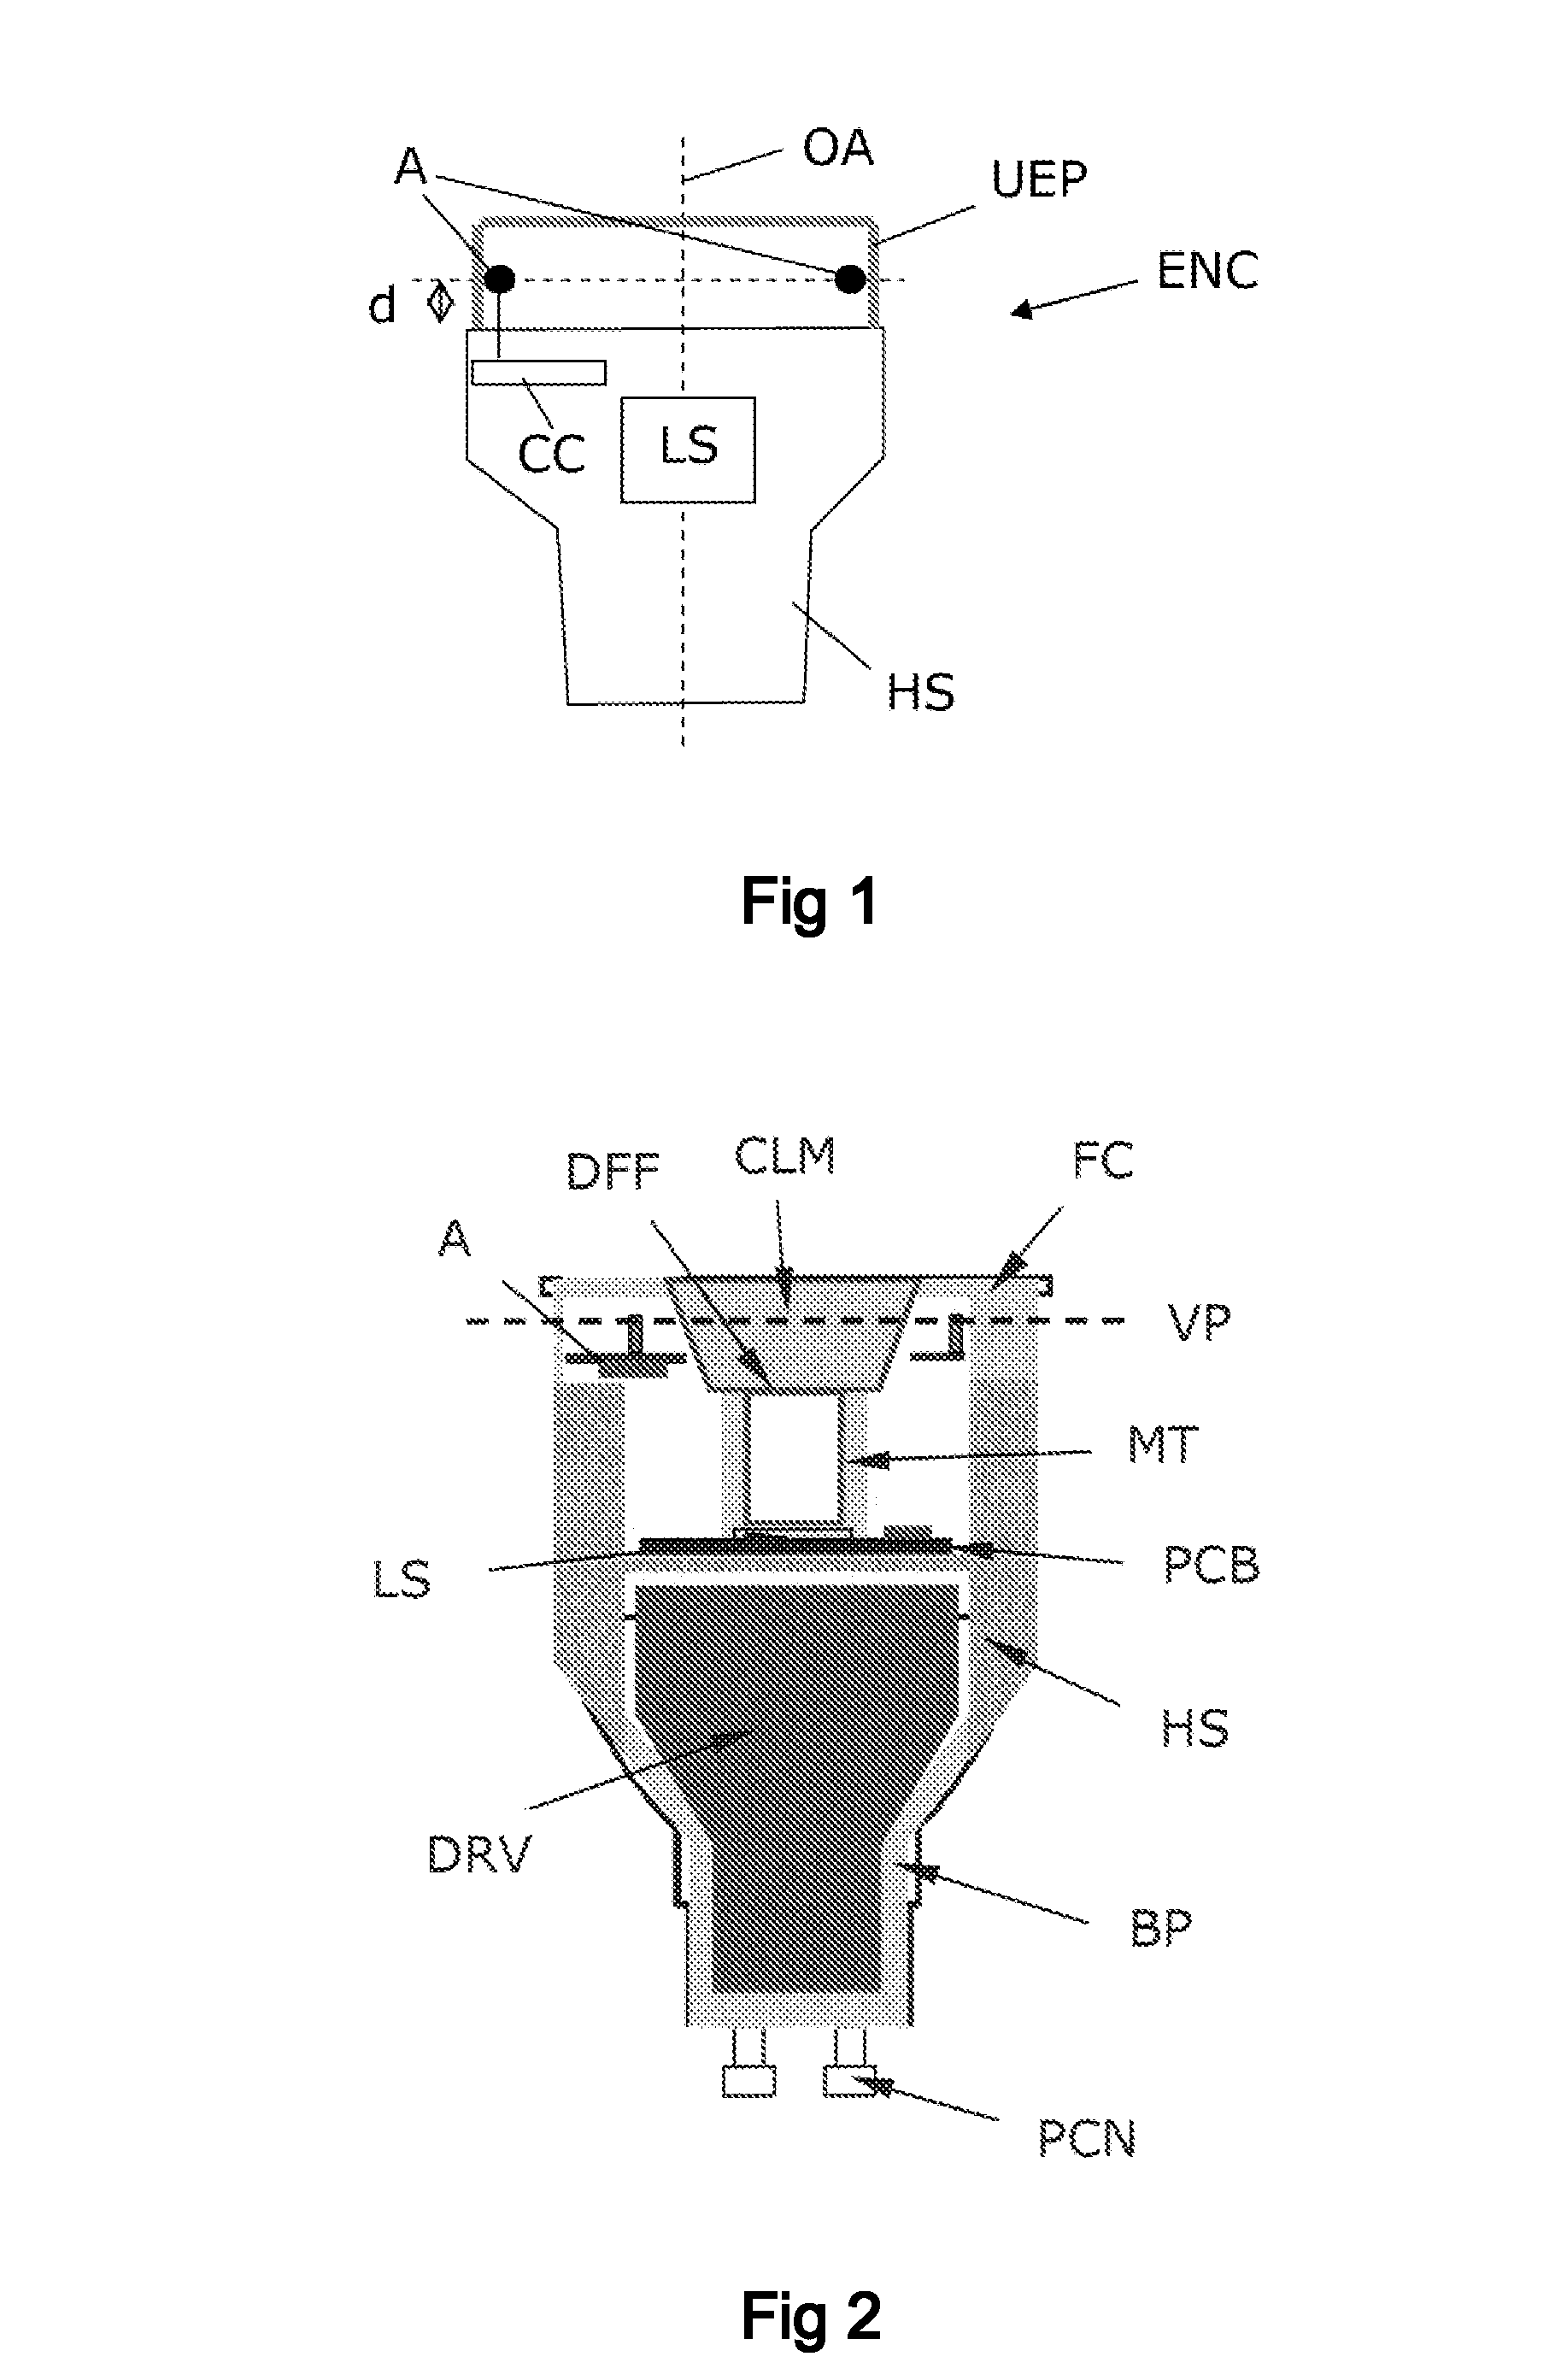 Lighting device with built-in RF antenna